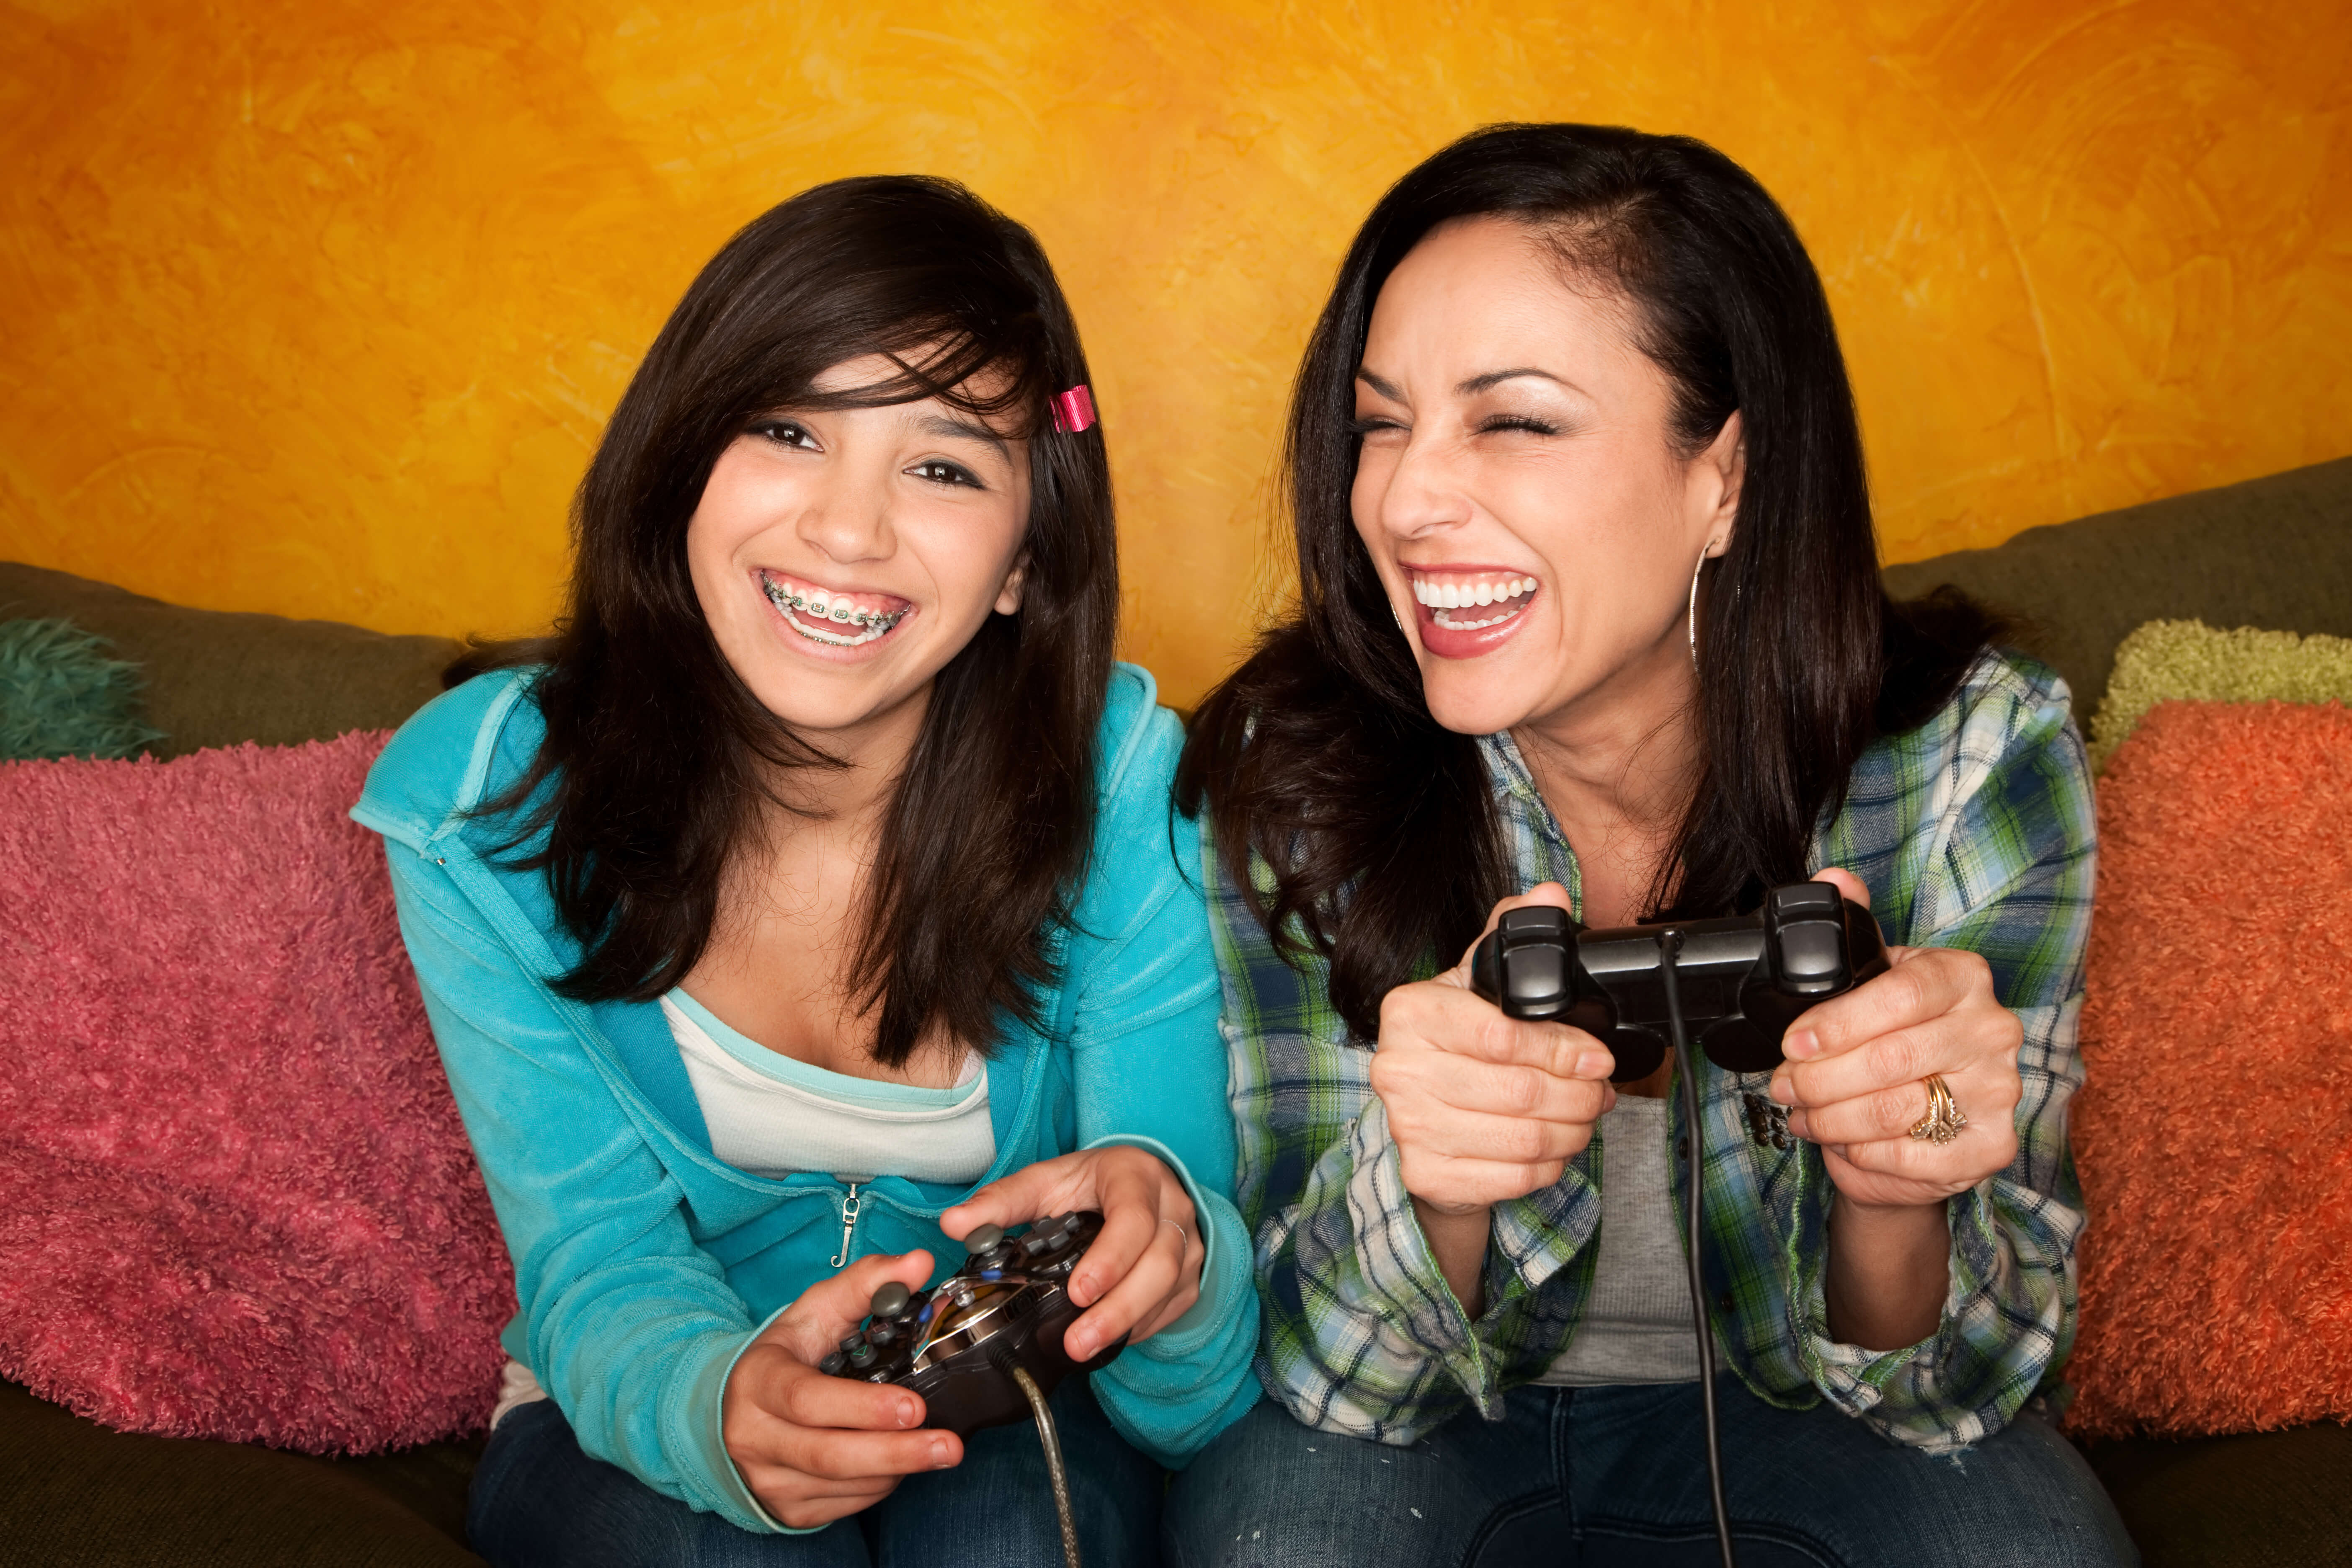 Attractive Hispanic Woman and Girl Playing a Video Game with Handheld Controllers